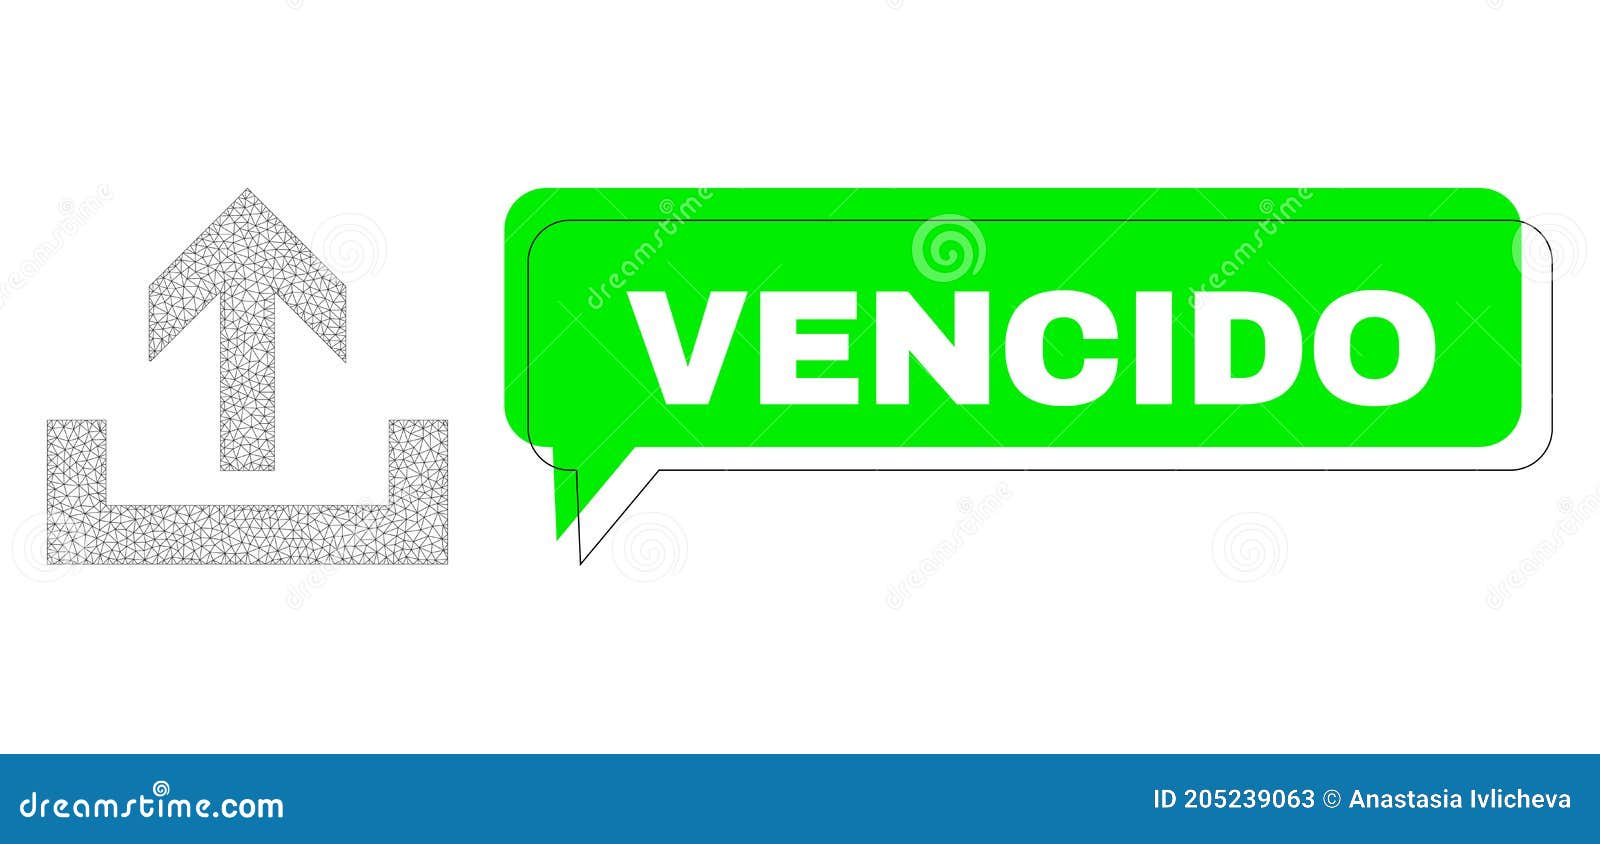 shifted vencido green phrase frame and mesh carcass upload